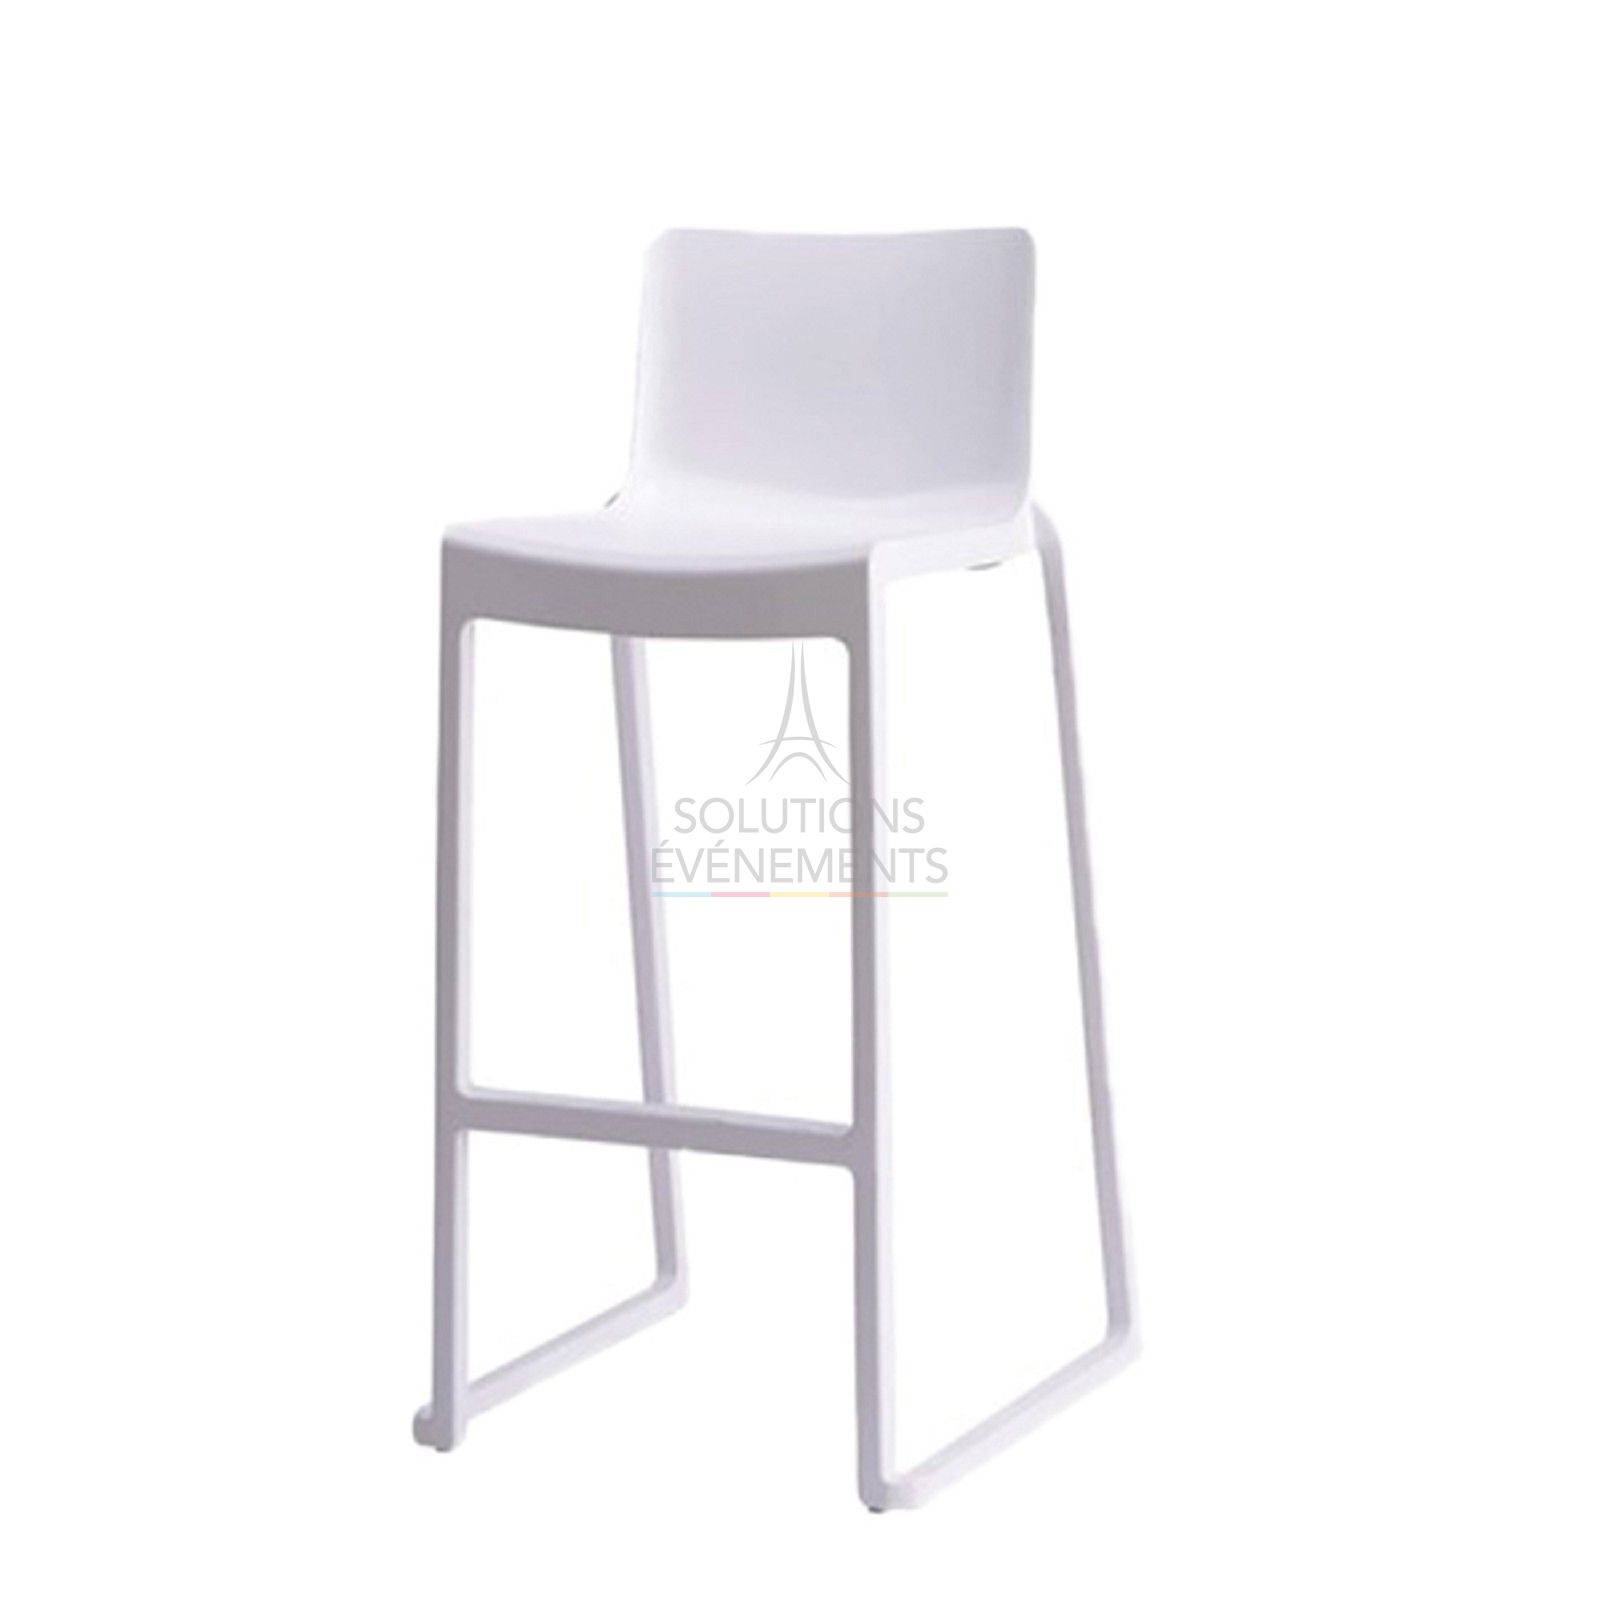 Rental of eco-responsible white high chair